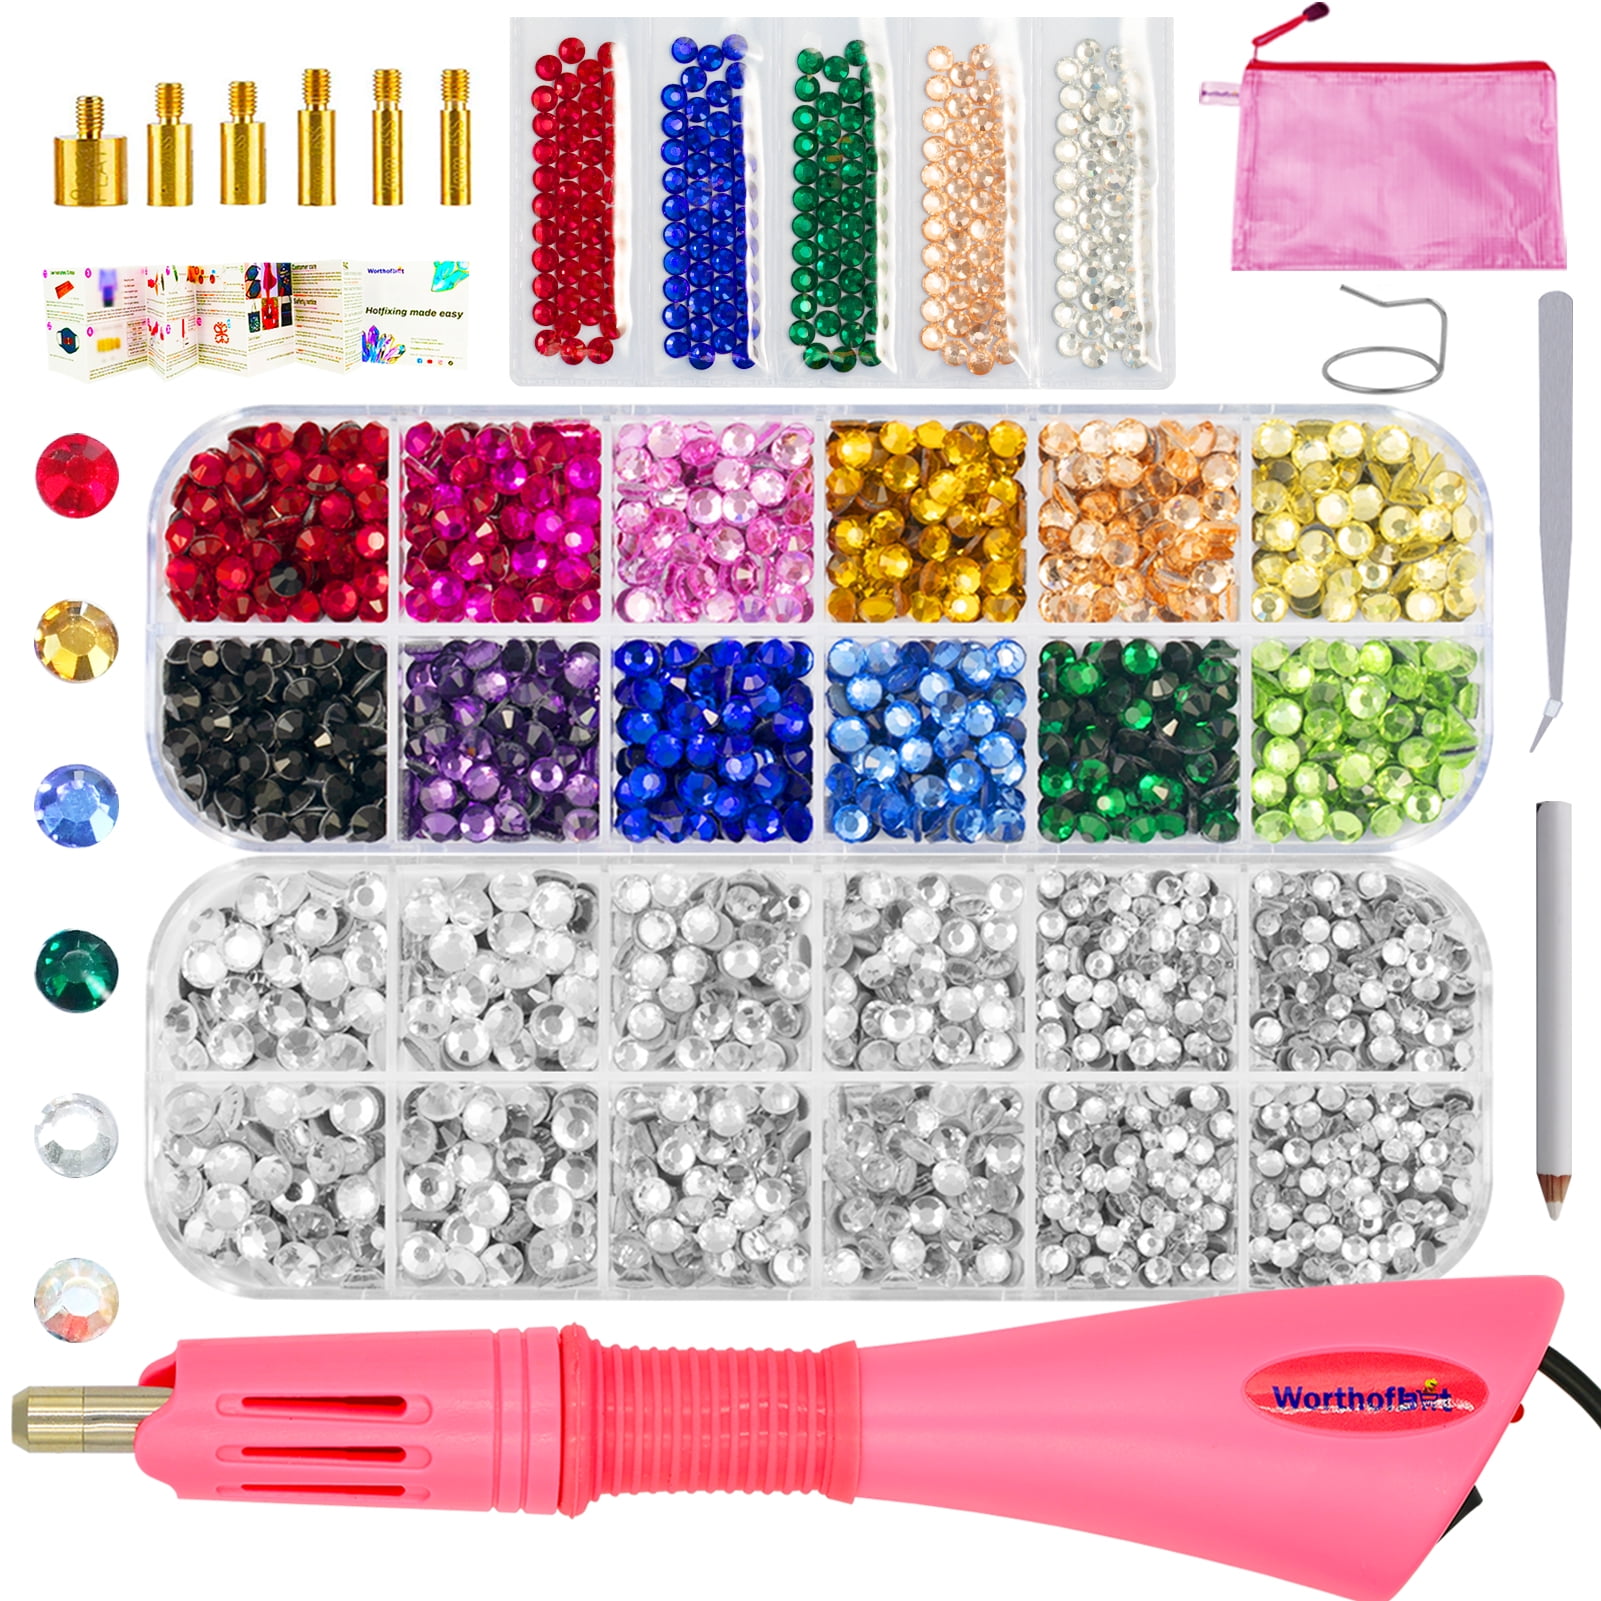 How to Use the BeDazzler Rhinestone Setting Craft Tool - FeltMagnet